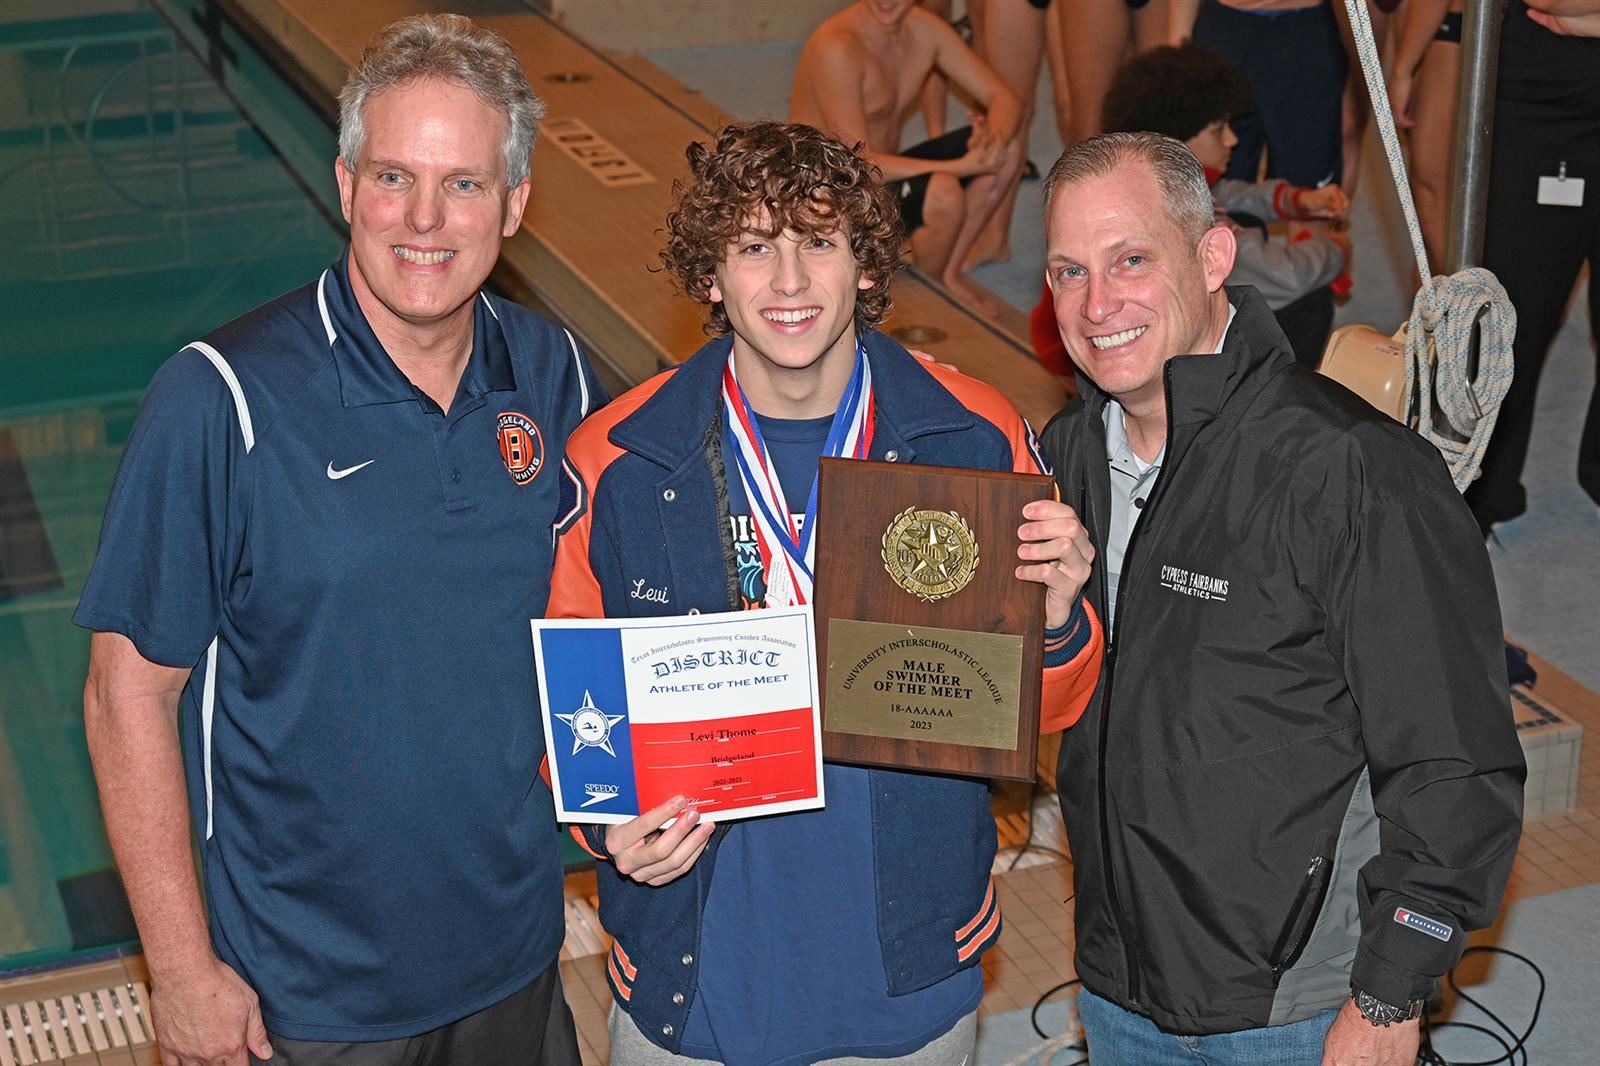 Bridgeland High School senior Levi Thome was named the District 18-6A Boys’ Swimmer of the Meet. 